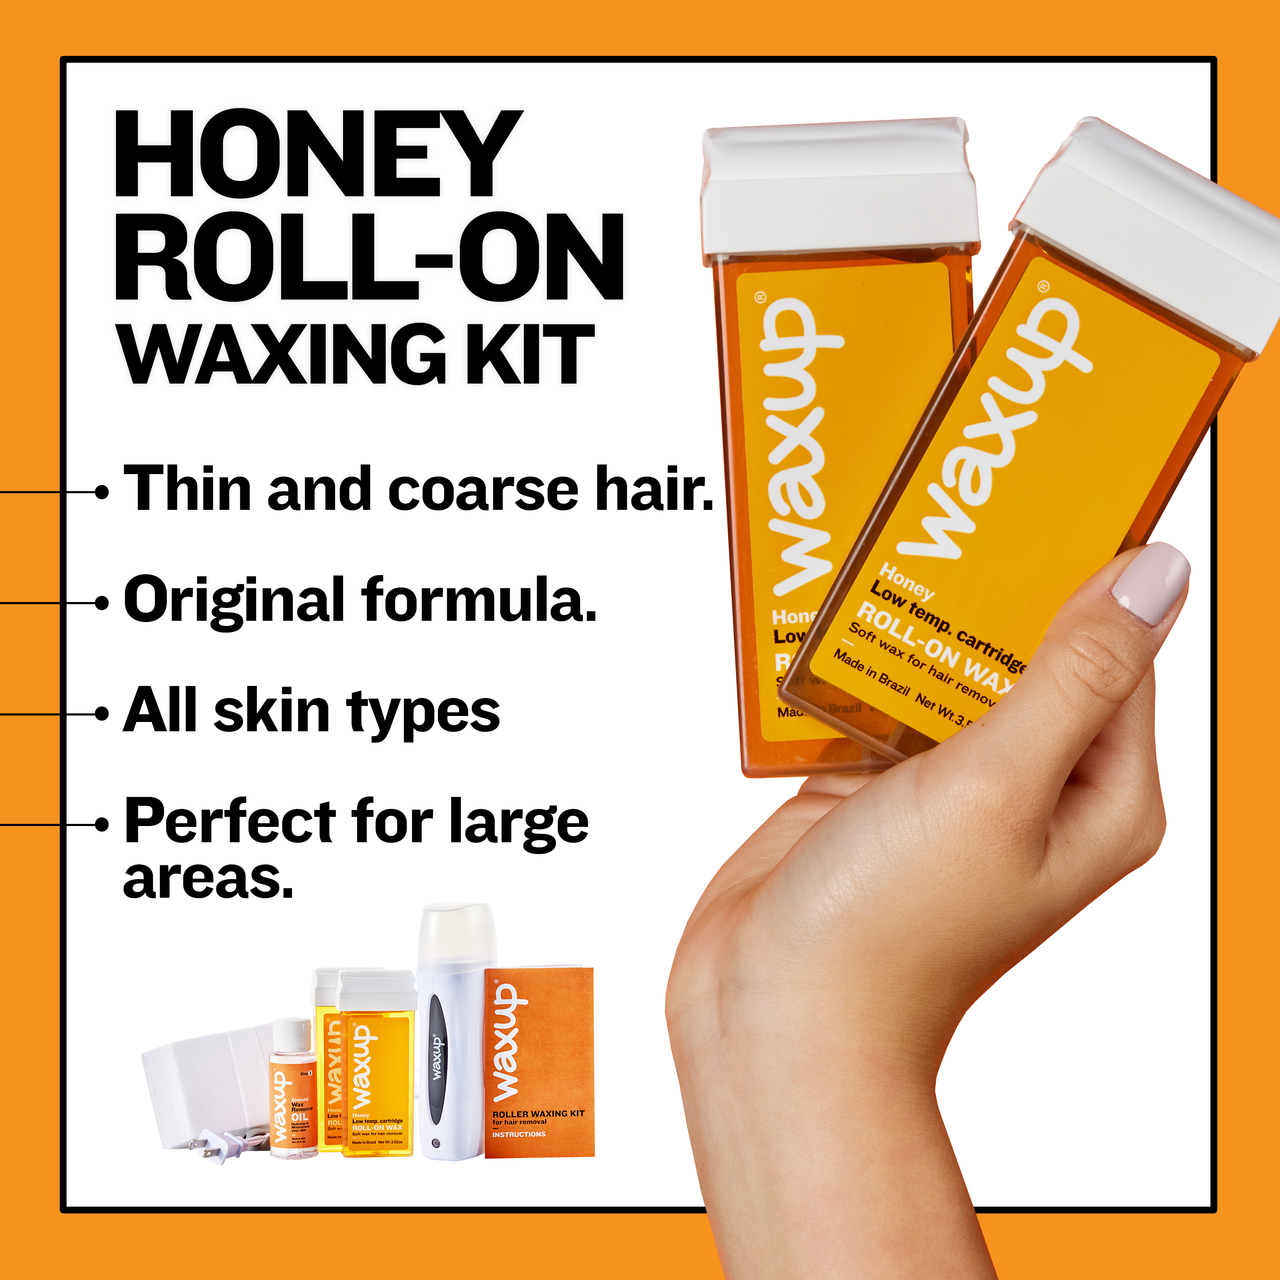 Honey Roller Waxing Kit - thatswaxup -  - Roller Waxing Kit - waxup hair removal wax body waxing kit women and men professional waxing supplies